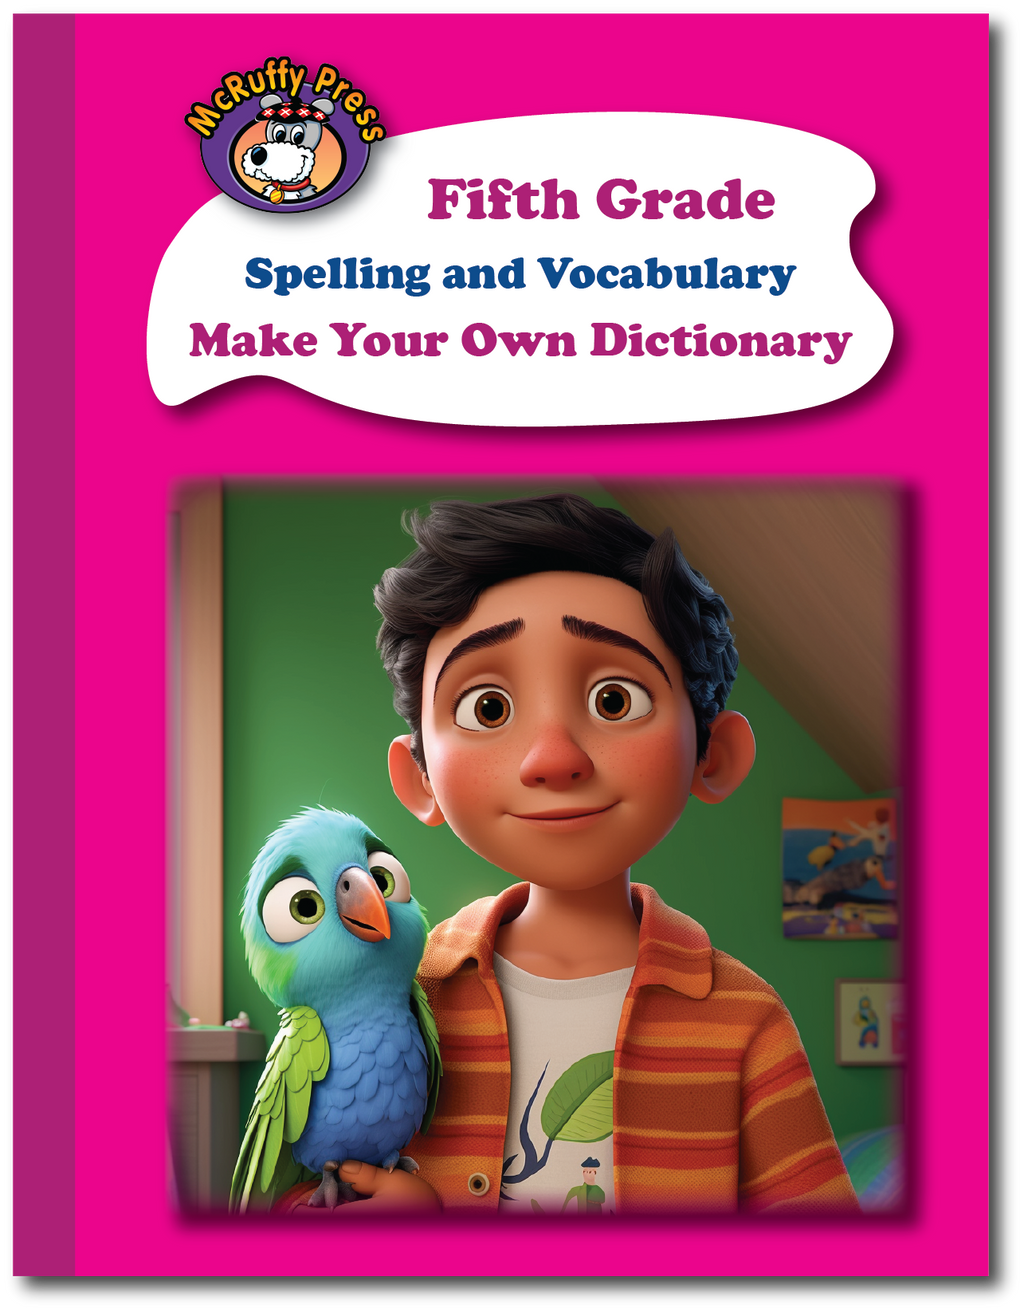 Fifth Grade Spelling and Vocabulary Make Your Own Dictionary - McRuffy Press